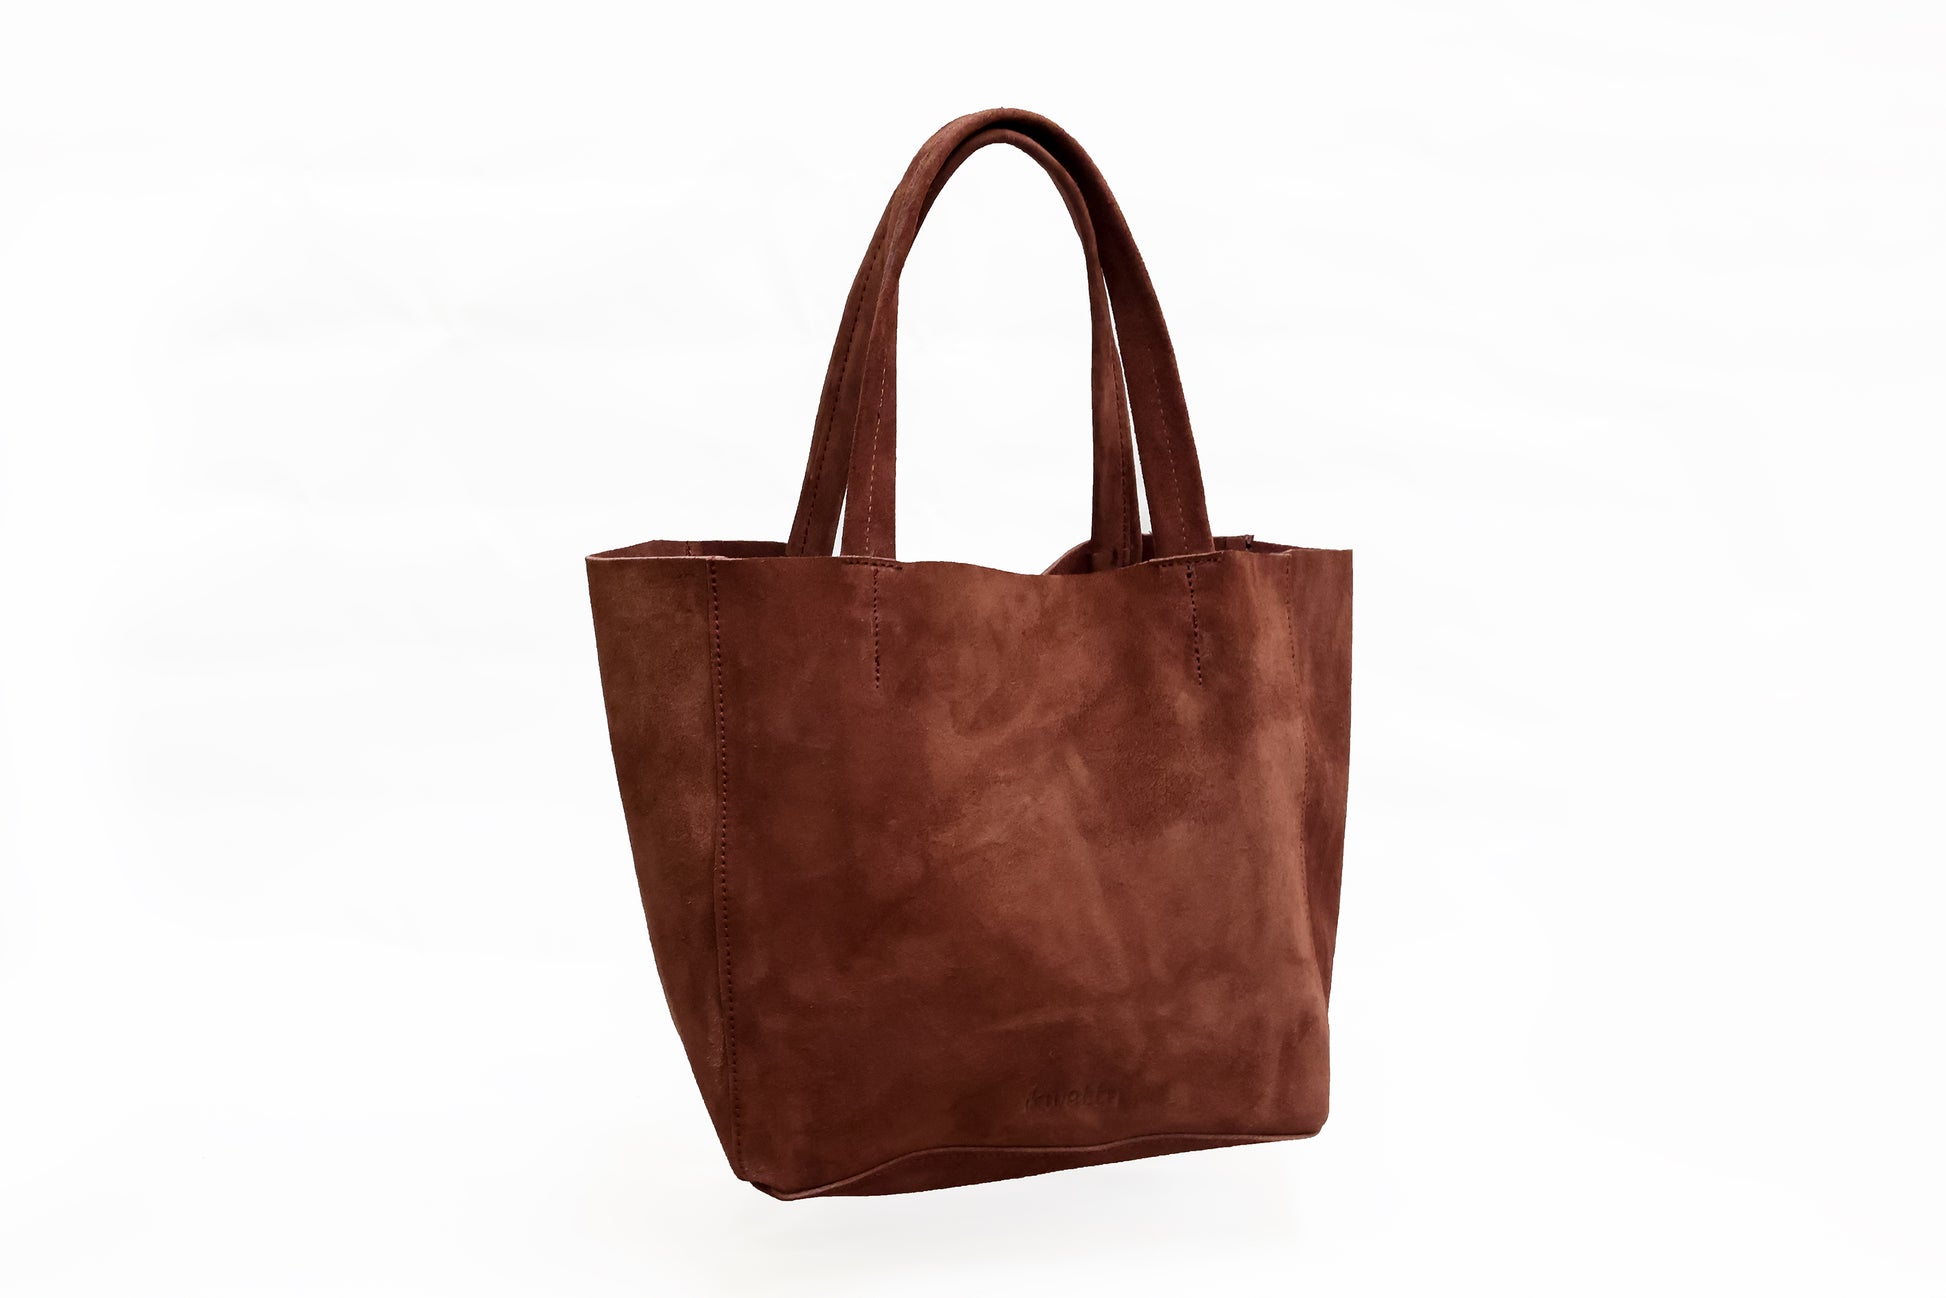 A tote that is spacious and versatile.